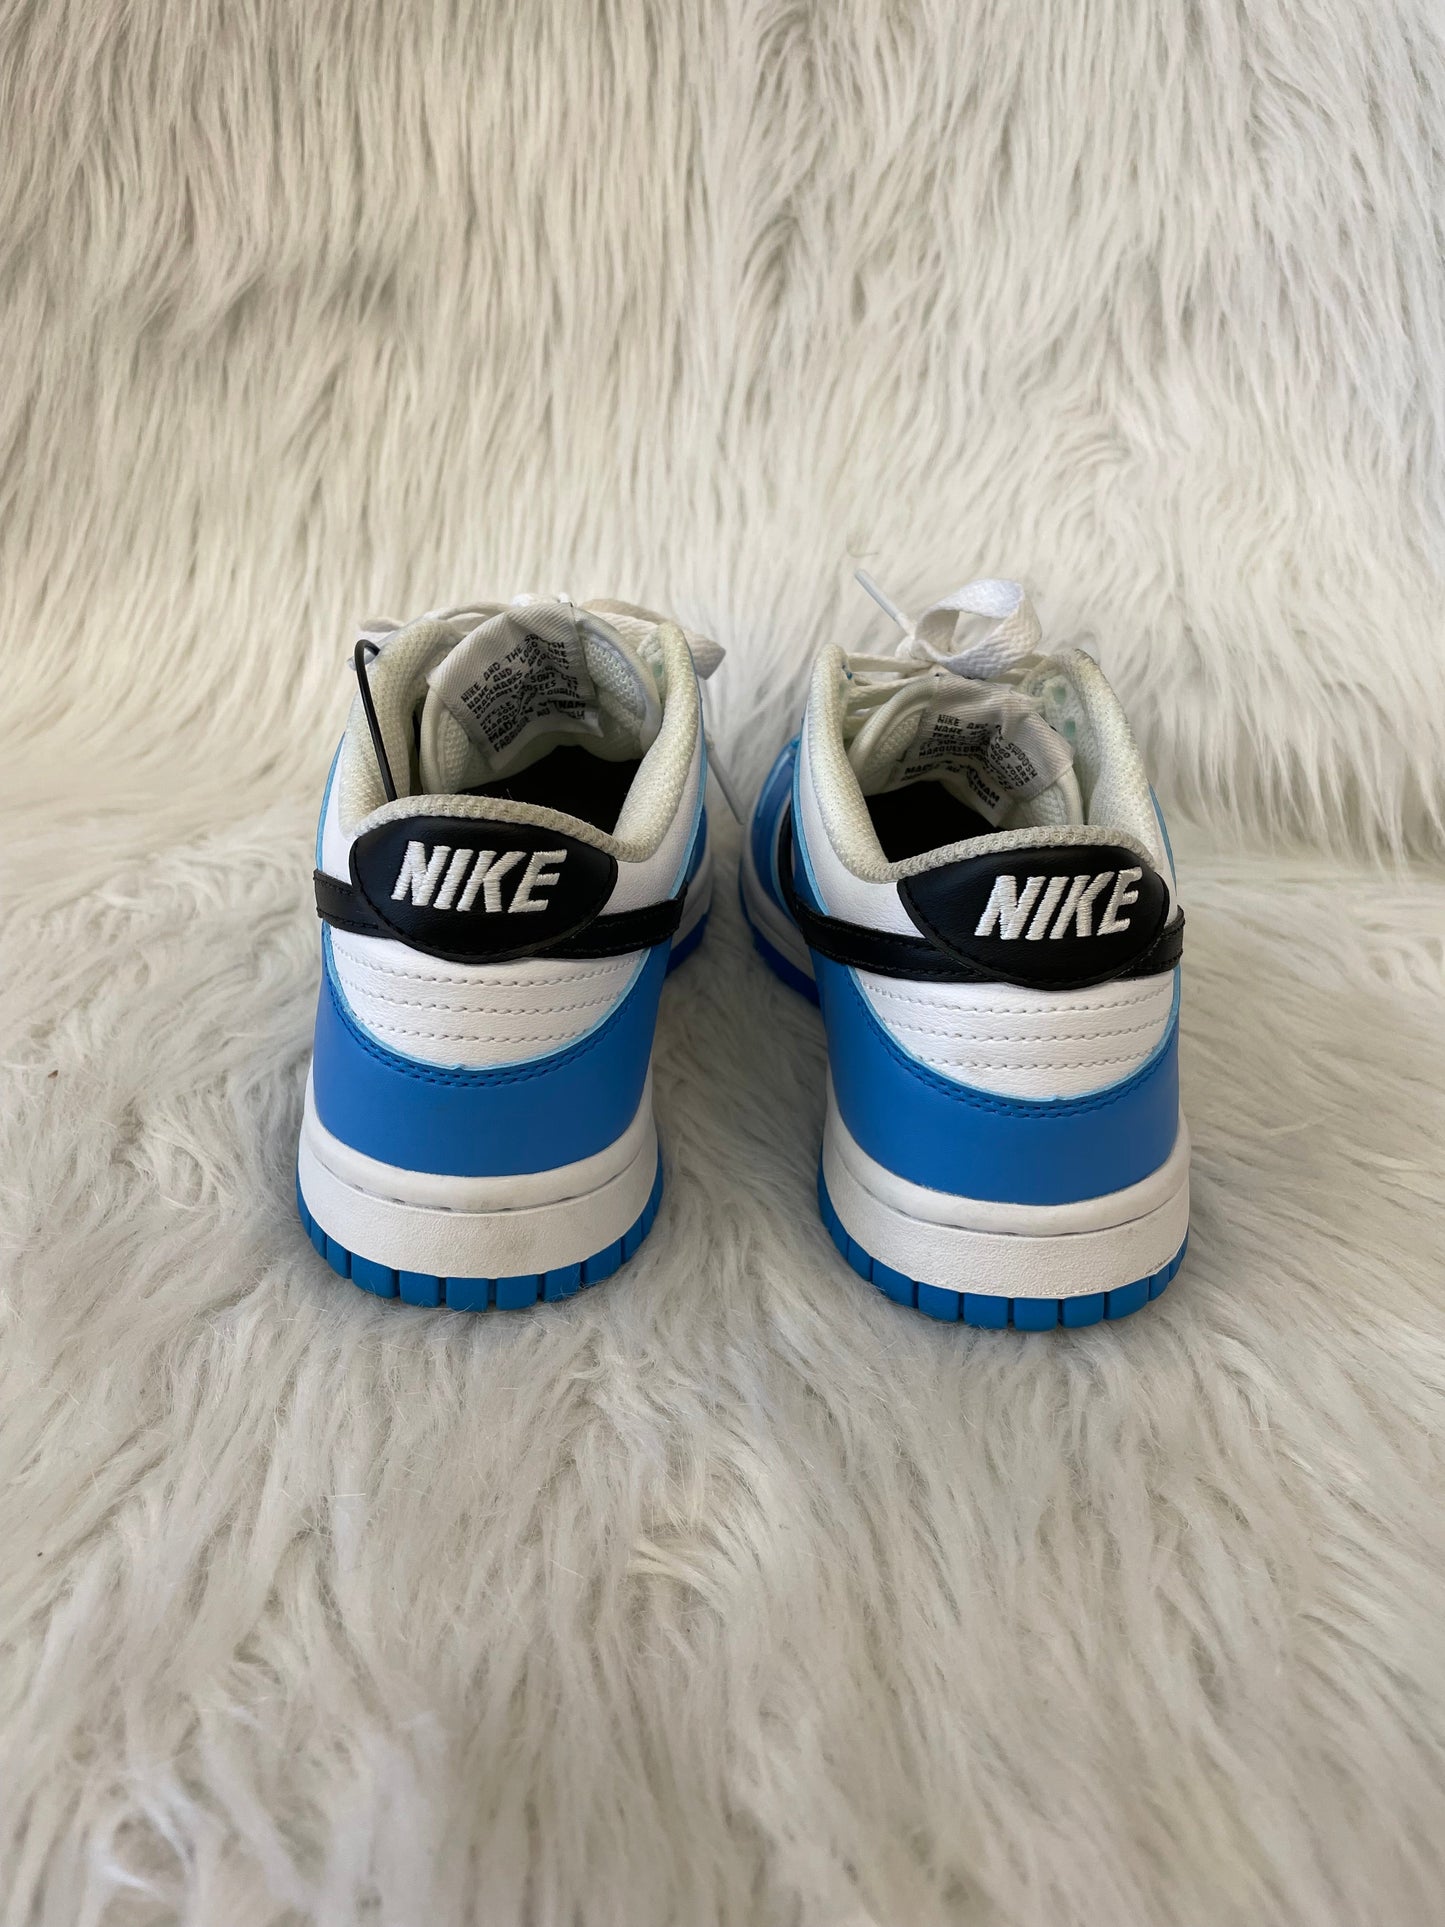 Blue & White Shoes Sneakers Nike, Size 6.5